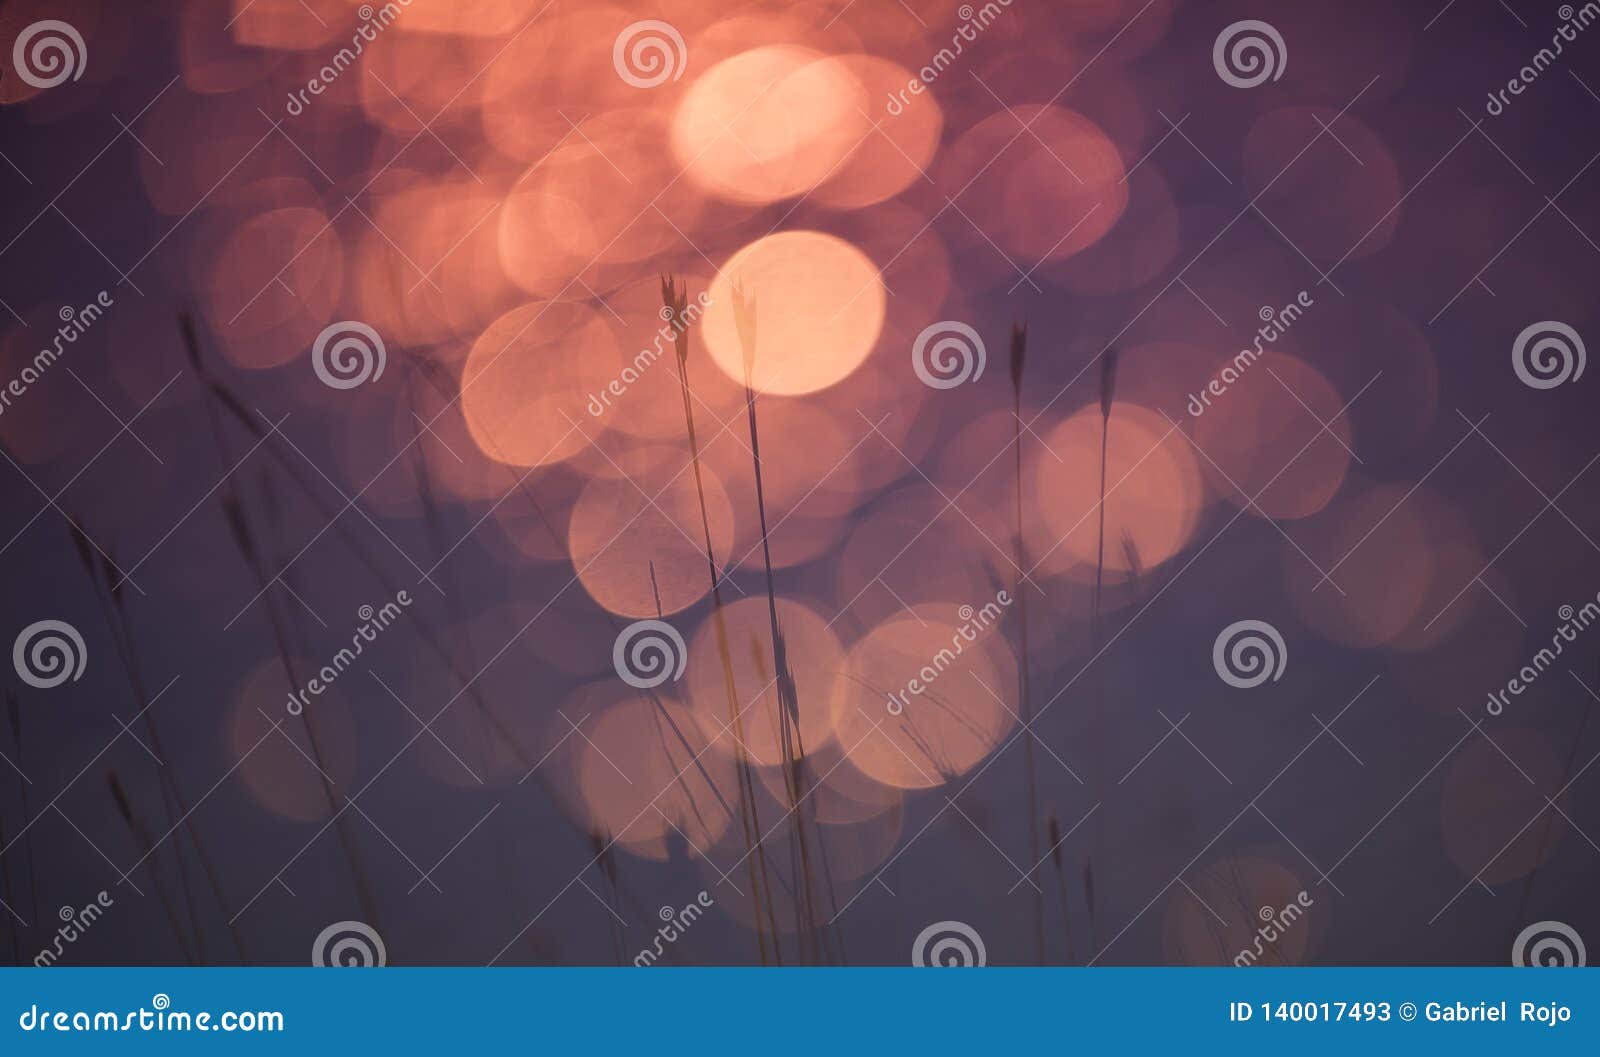 grass, abstract, background..